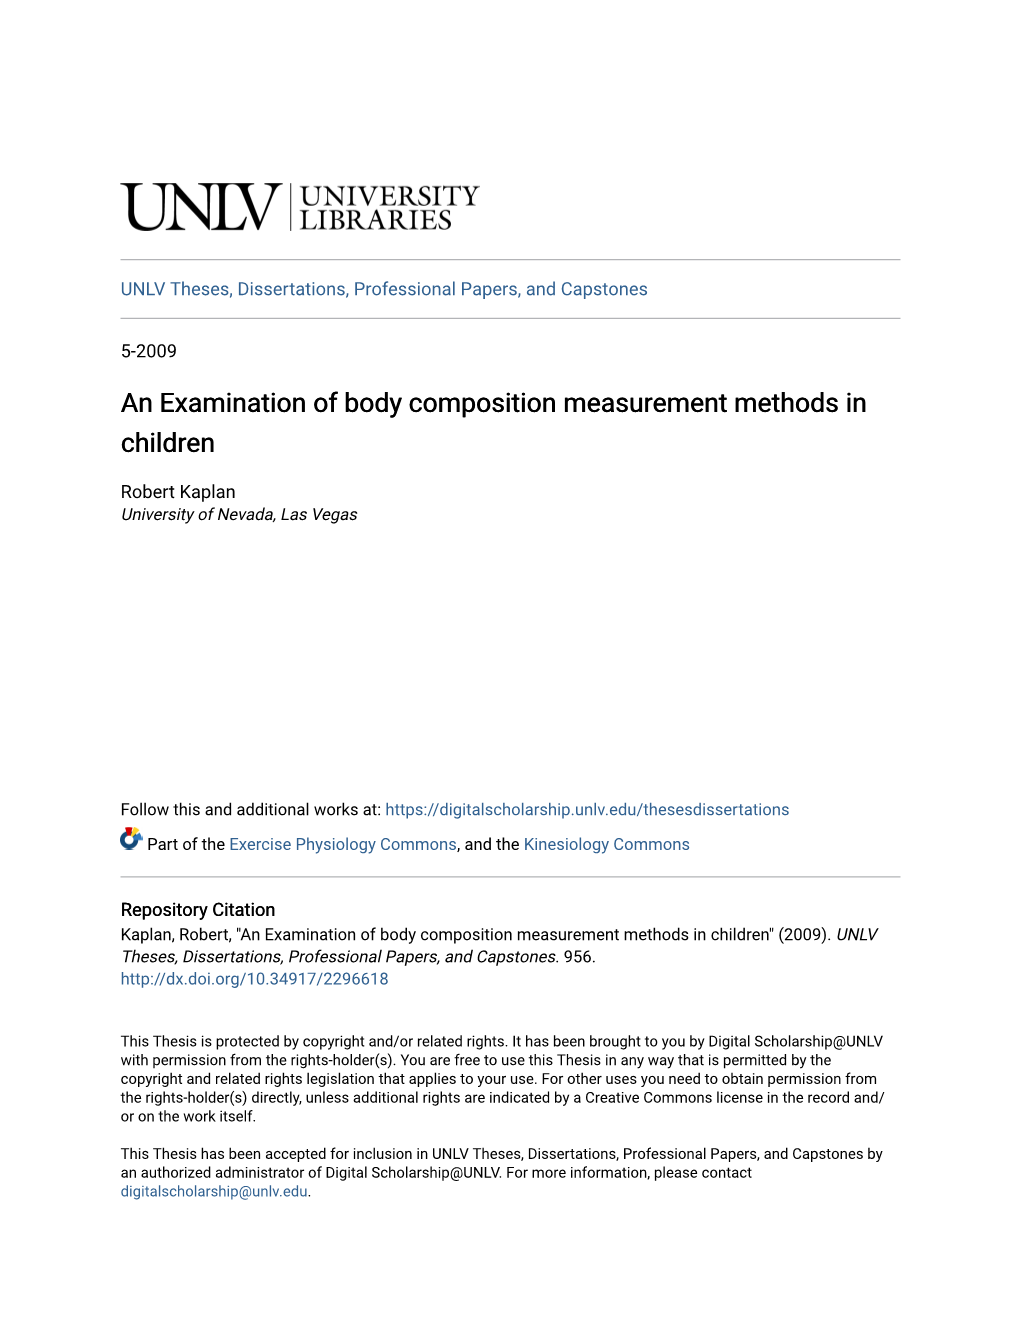 An Examination of Body Composition Measurement Methods in Children